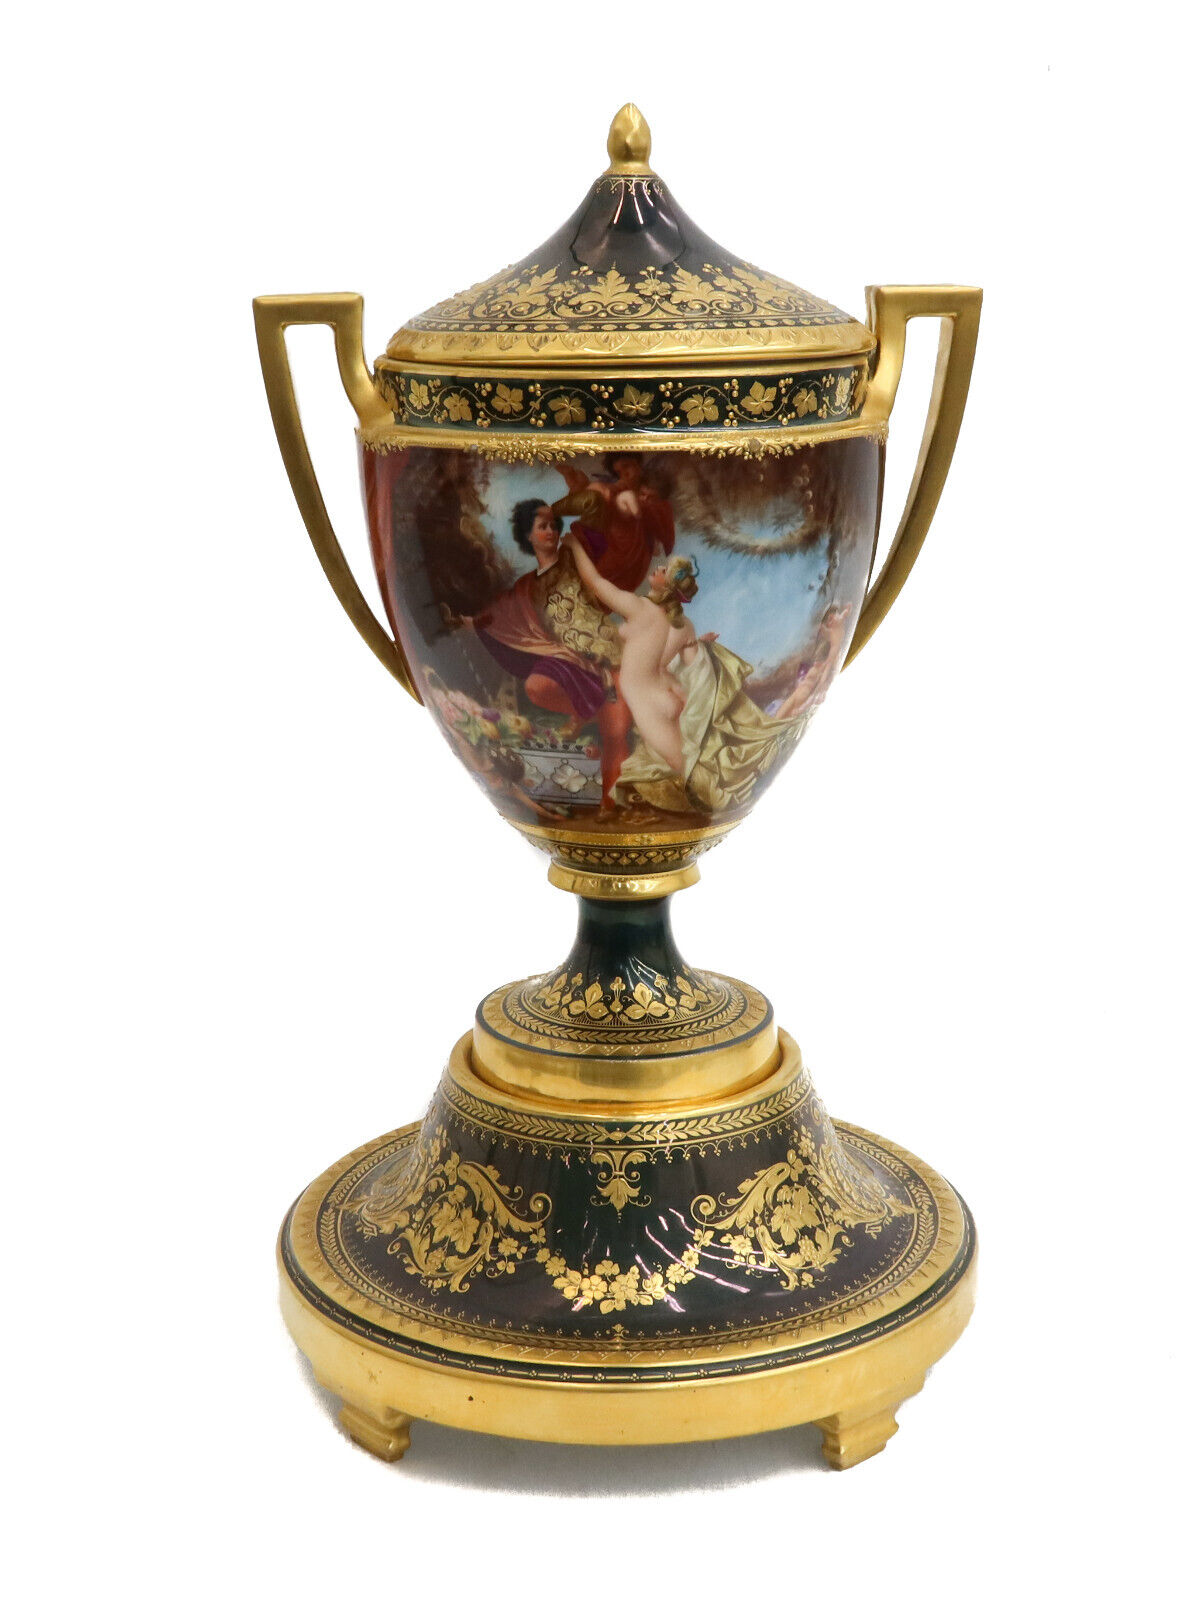 Royal Vienna Hand Painted Porcelain Footed Urn, Tannhauser by Schlesinger c1900